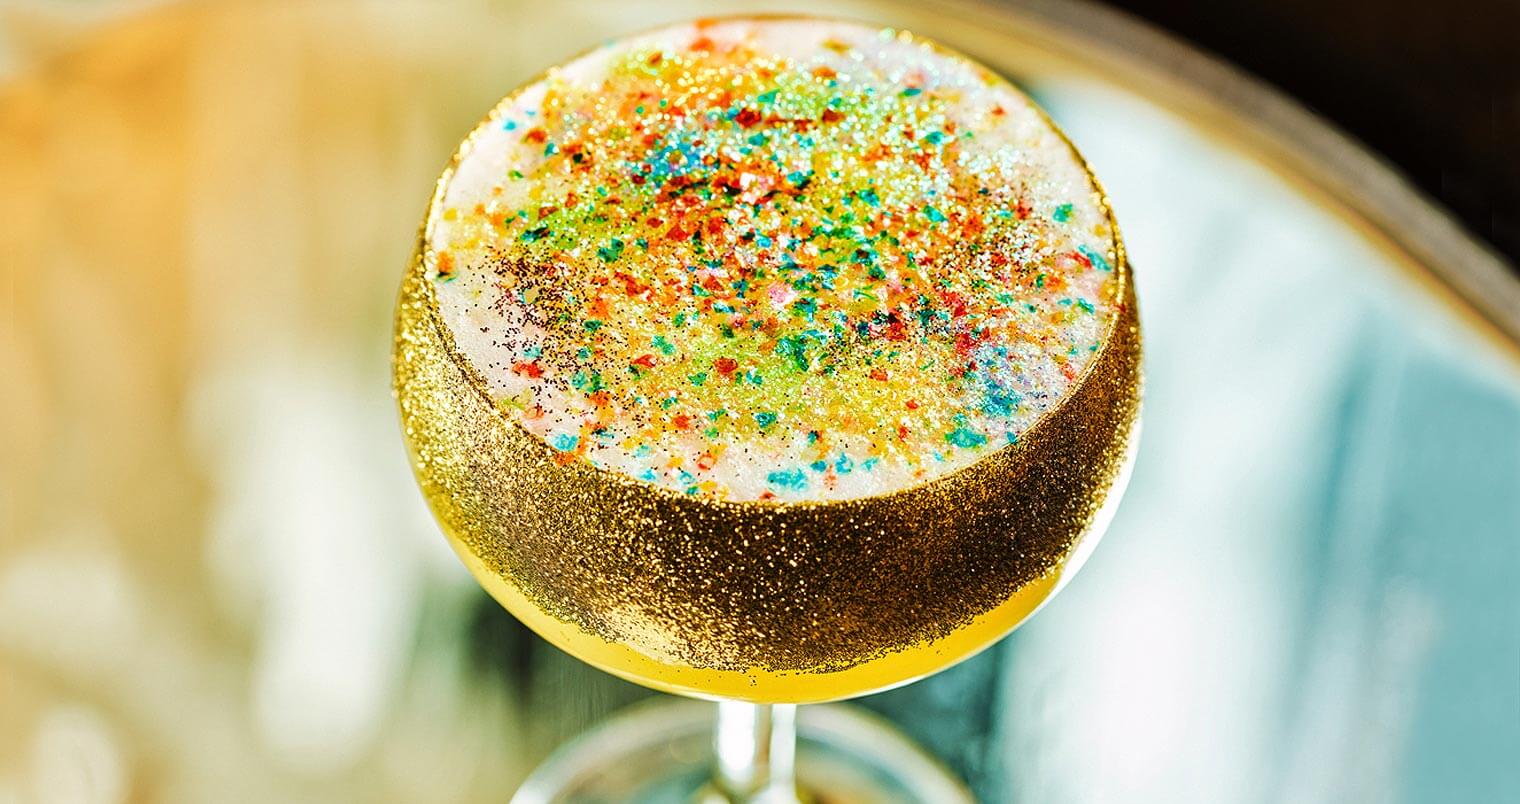 Edible Gold Cocktail Recipes. Martini, Champagne or just about